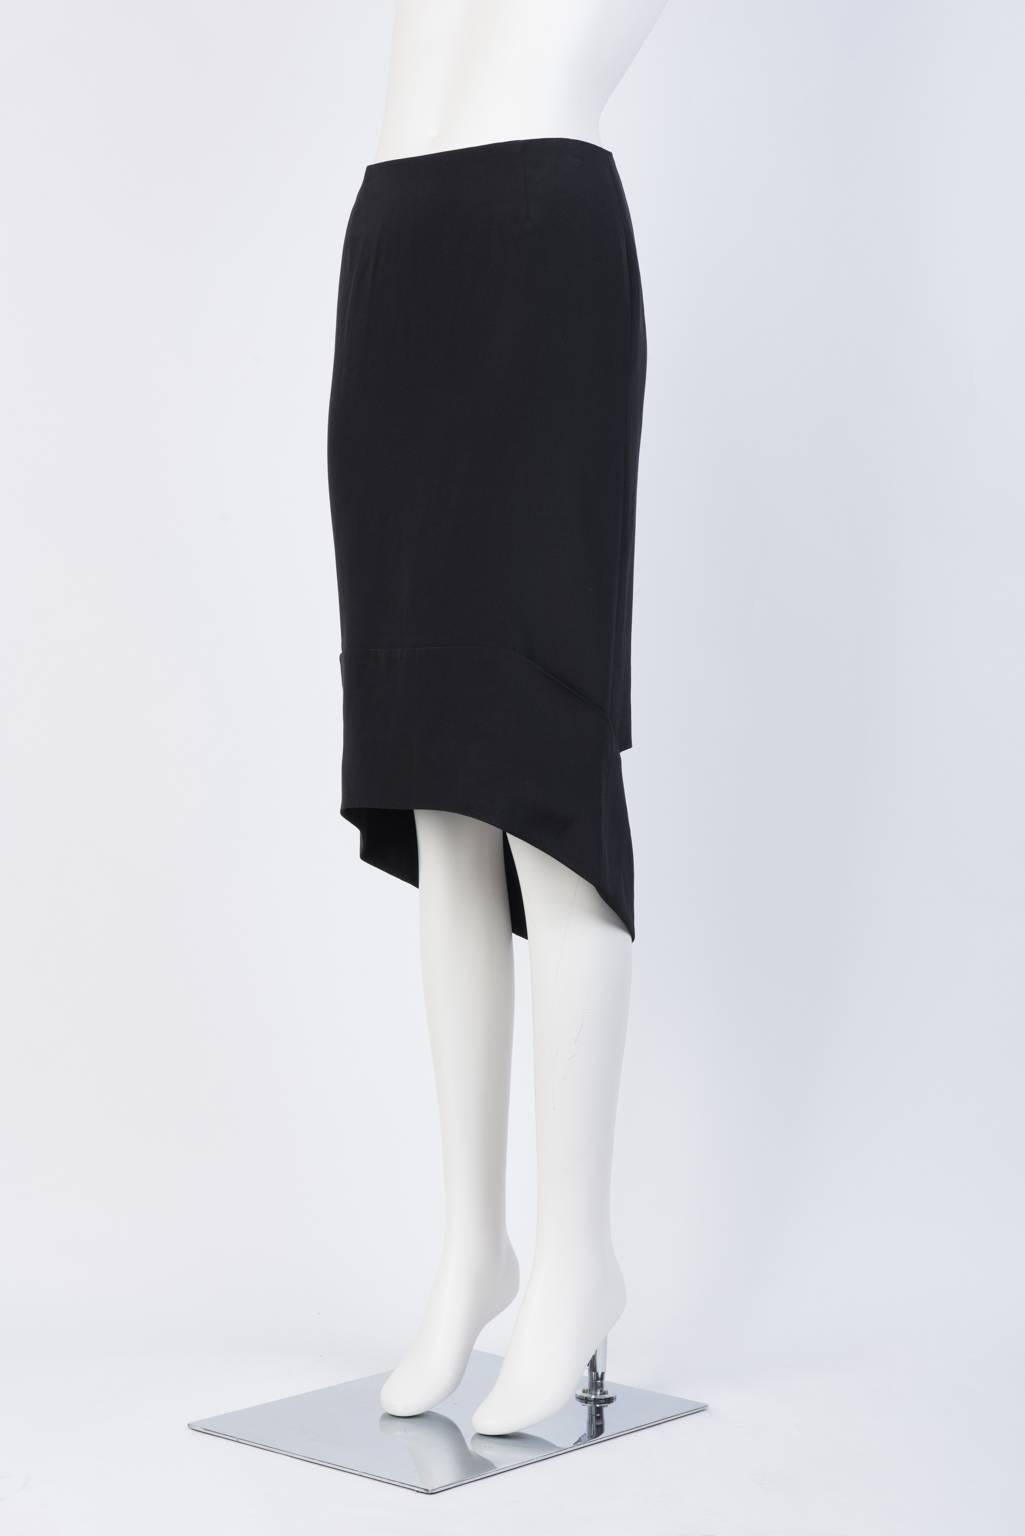 Crêpe de Chine skirt with asymmetrical hem and cut out detaiing in back.